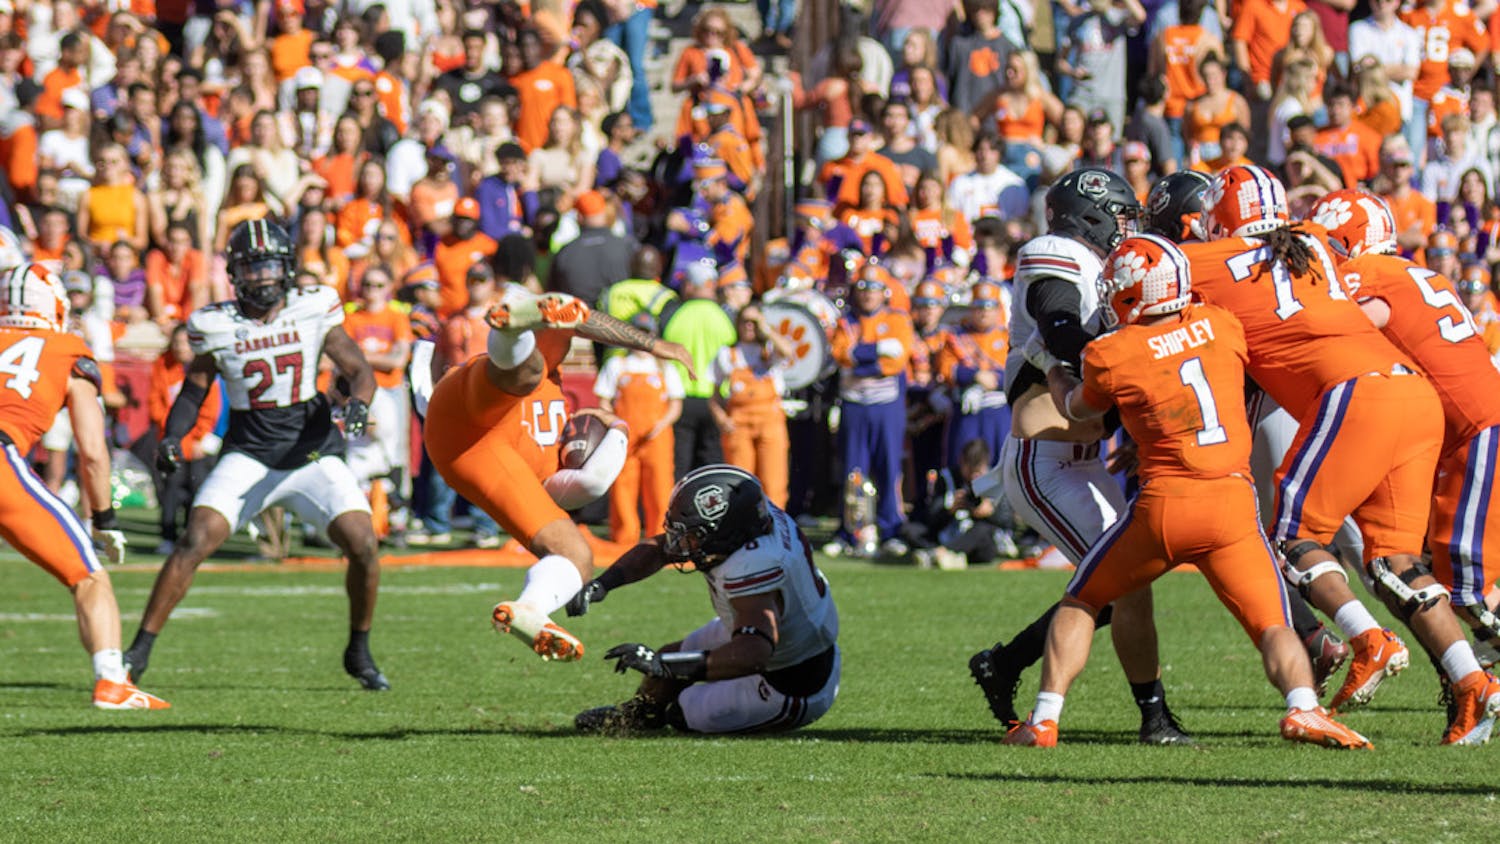 Redshirt sophomore linebacker Debo Williams tackles the Clemson ball carrier on Nov. 26, 2022 at Memorial Stadium. Williams contributed to the 48 total tackles made by the Gamecocks.